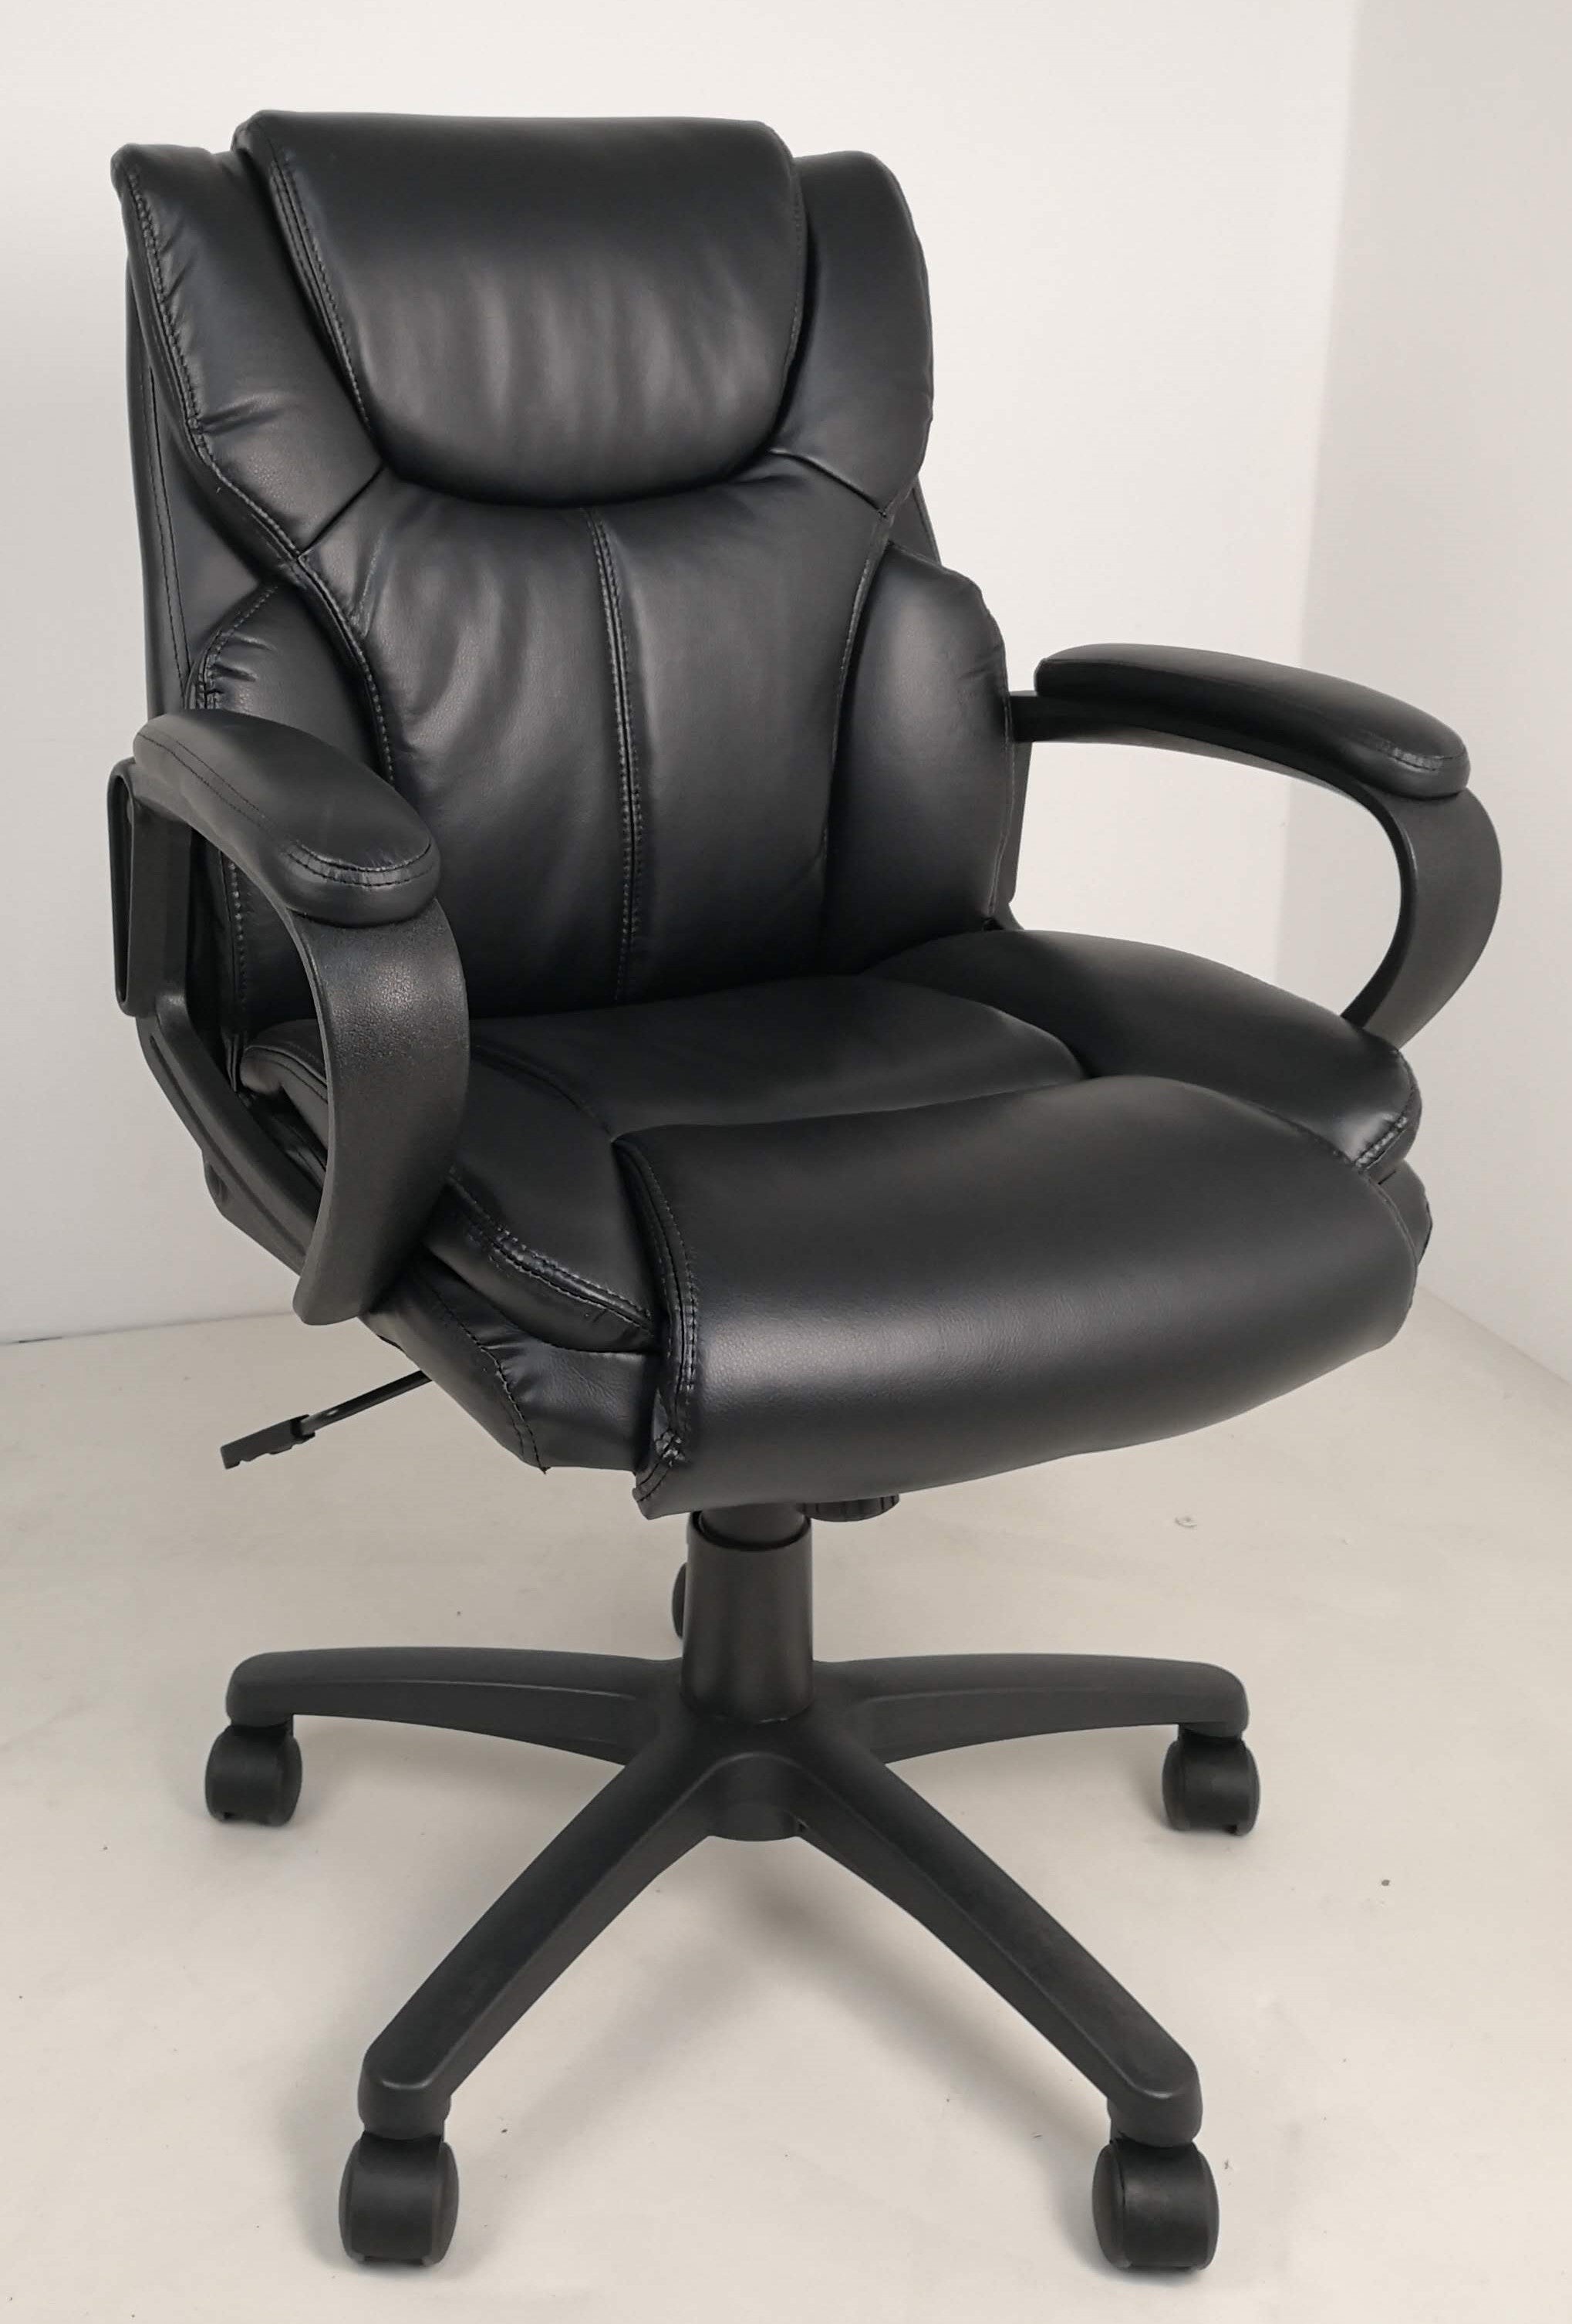 Soft Padded Low Back Executive Office Chair in Black Leather - 2121C